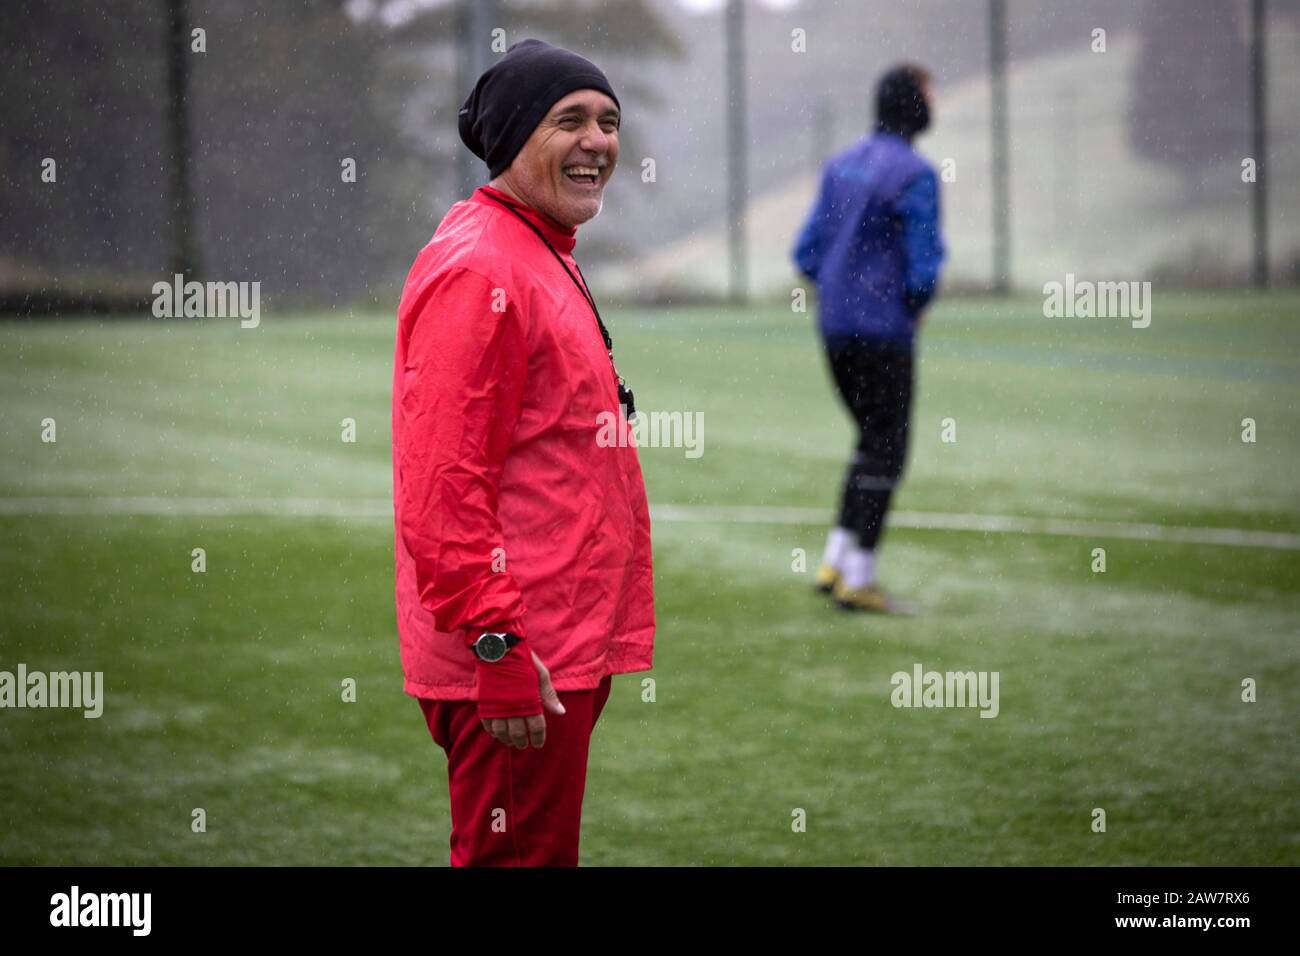 Former Argentina international footballer Pedro Pasculli, pictured during a training session with Bangor City where he was appointed  manager in October, 2019. This was the 1986 World Cup winner's 13th management position, having previously been in charge of the Albania and Uganda national teams as well as a host of clubs worldwide. Bangor City competed in the Cymru Alliance, the second tier of Welsh football having been demoted due to financial irregularities at the end of the 2017-18 season. The club was owned by Italian Domenico Serafino. Stock Photo